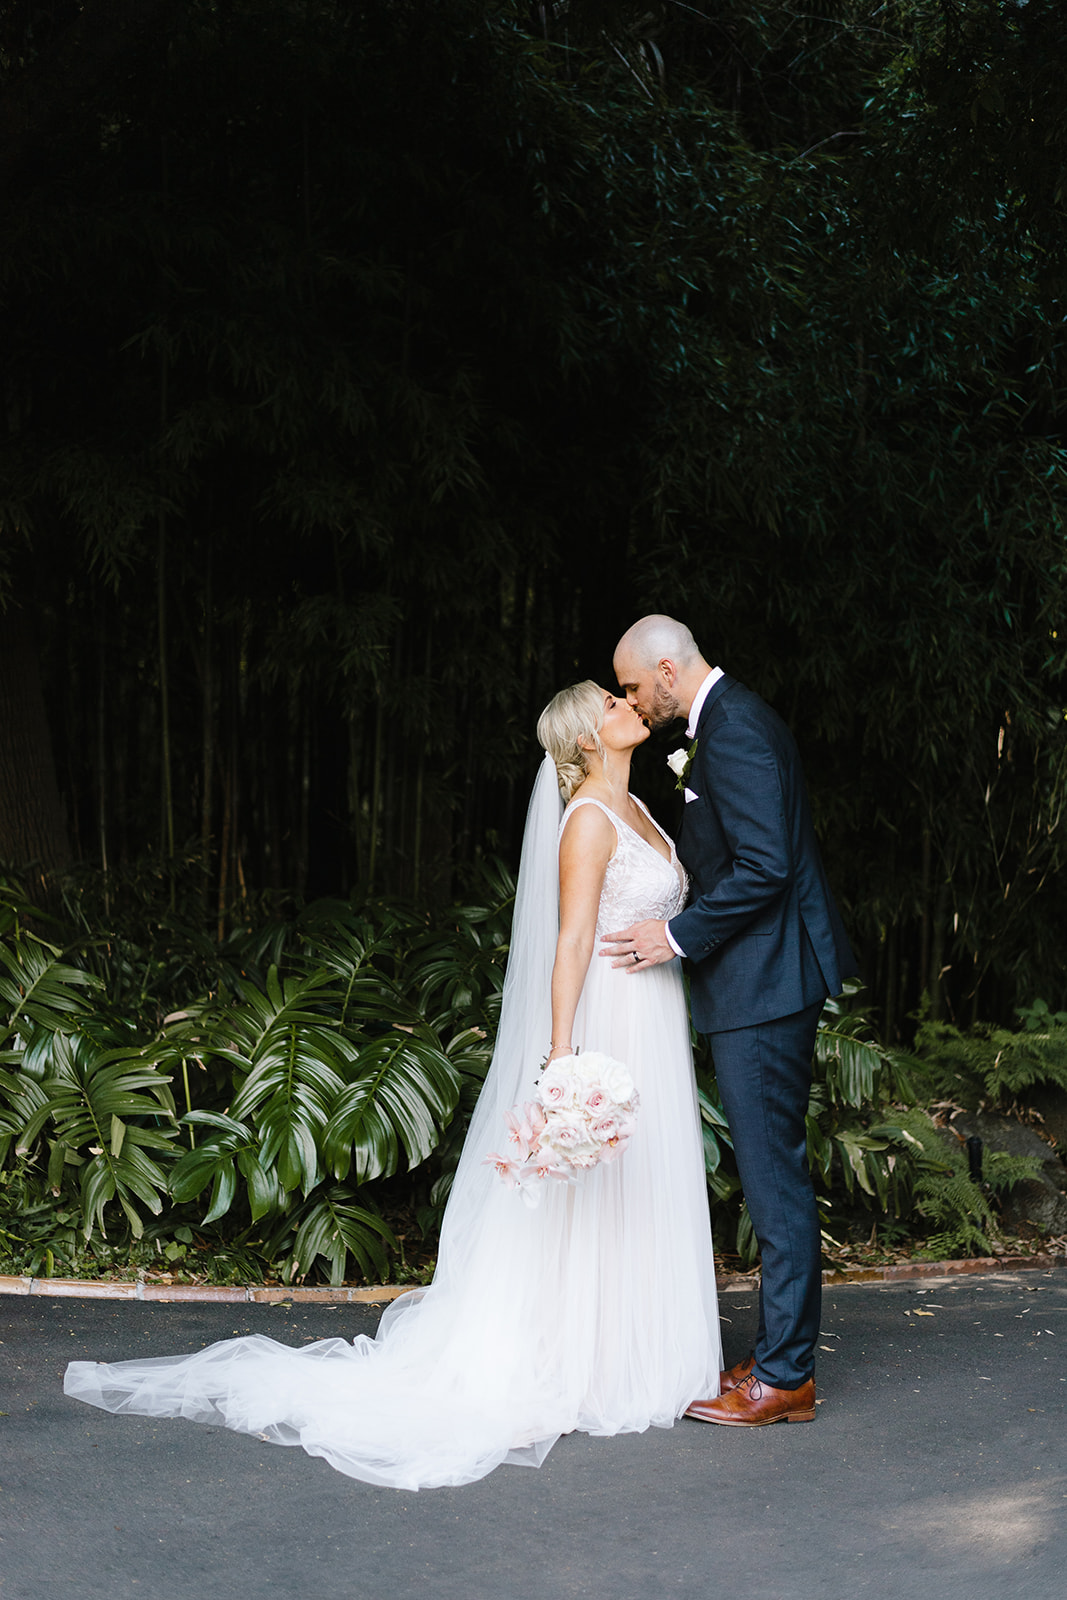 Bride and groom kiss at The Terrace Royal Botanic Gardens Melbourne wedding